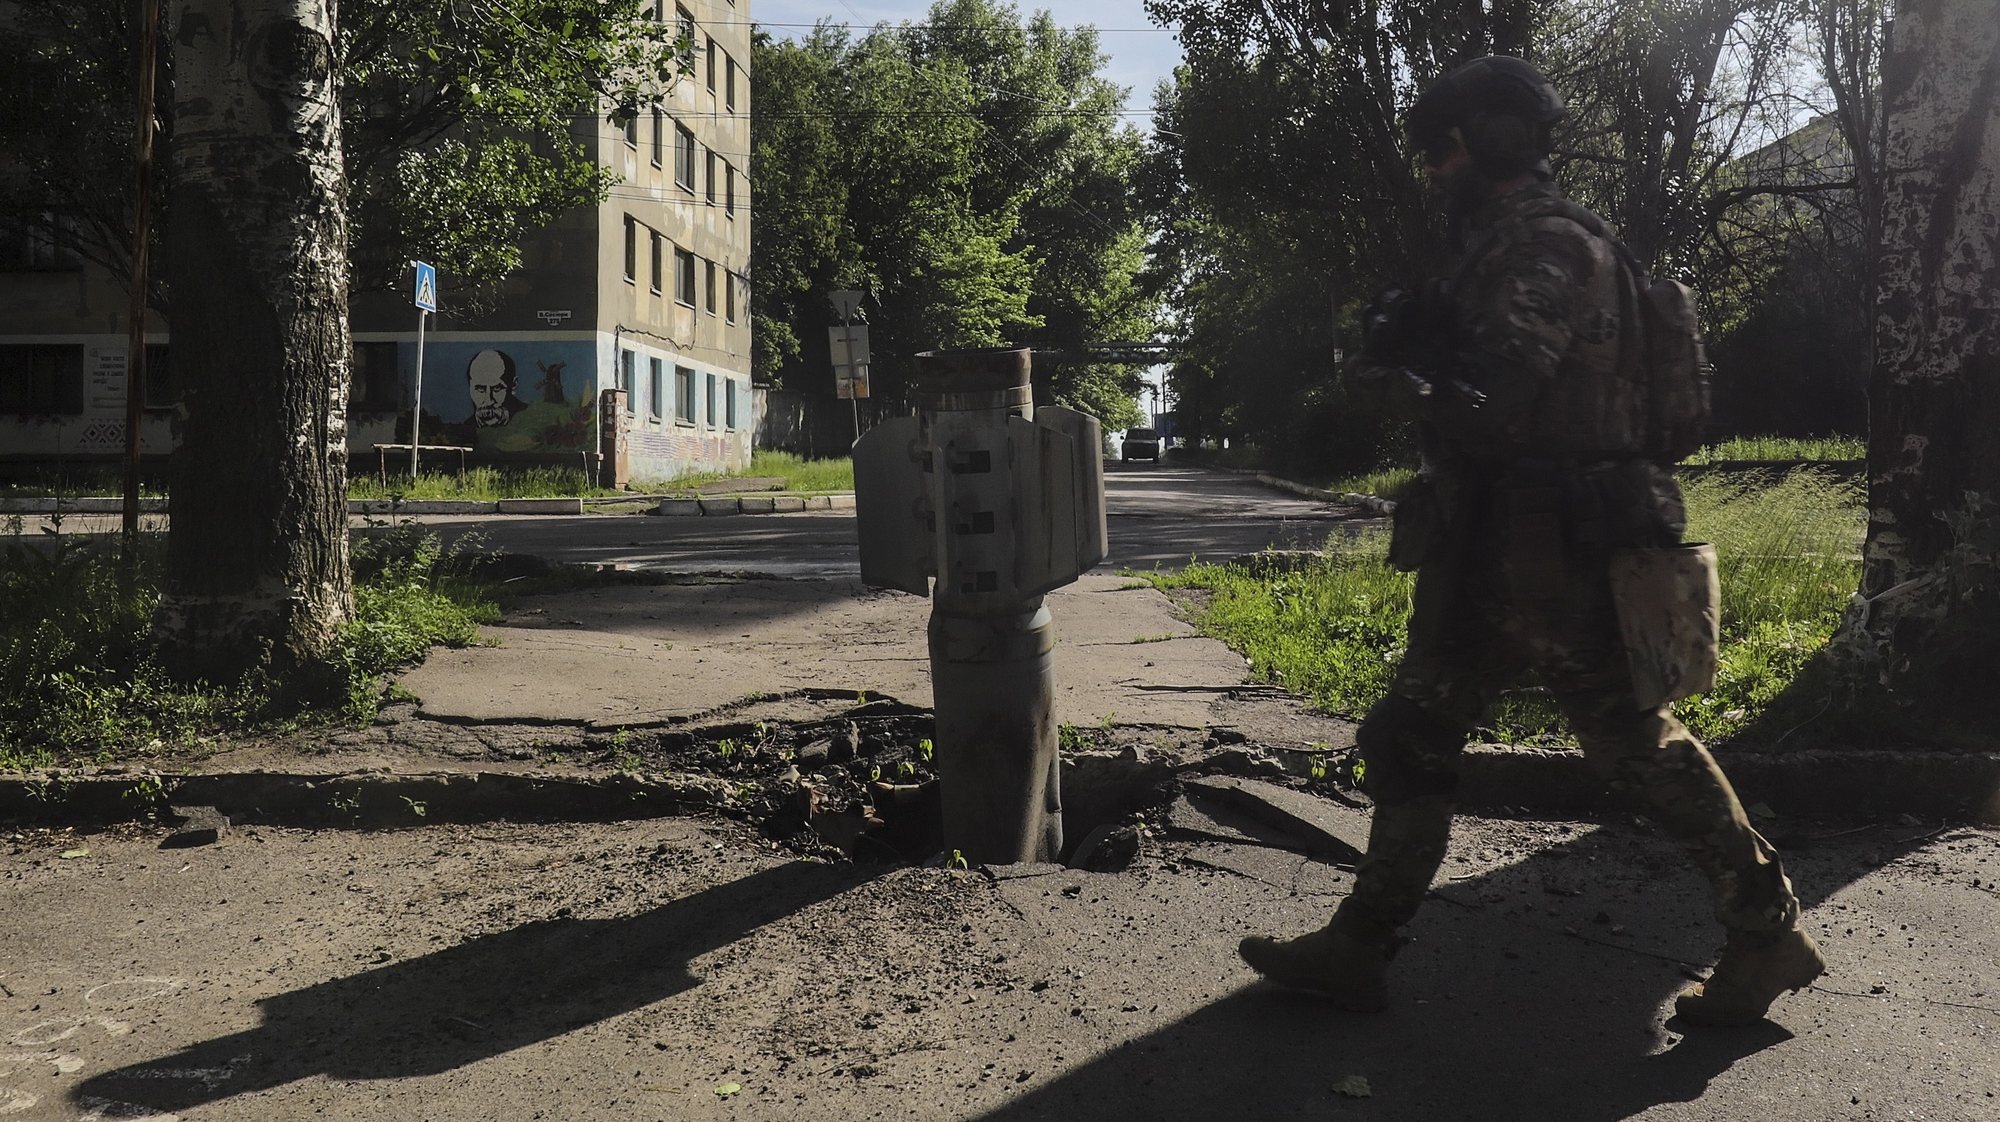 epa09992798 A Ukrainian soldier walks past a part of a rocket near the front line in the city of Severodonetsk, Luhansk region, Ukraine, 02 June 2022, where heavy fighting took place in the last few days. While addressing the Luxembourg parliament, Ukrainian President Volodymyr Zelensky said that as of 02 June, about 20 percent of Ukraine is under the control of Russia. Russian troops on 24 February entered Ukrainian territory, starting a conflict that has provoked destruction and a humanitarian crisis.  EPA/STR